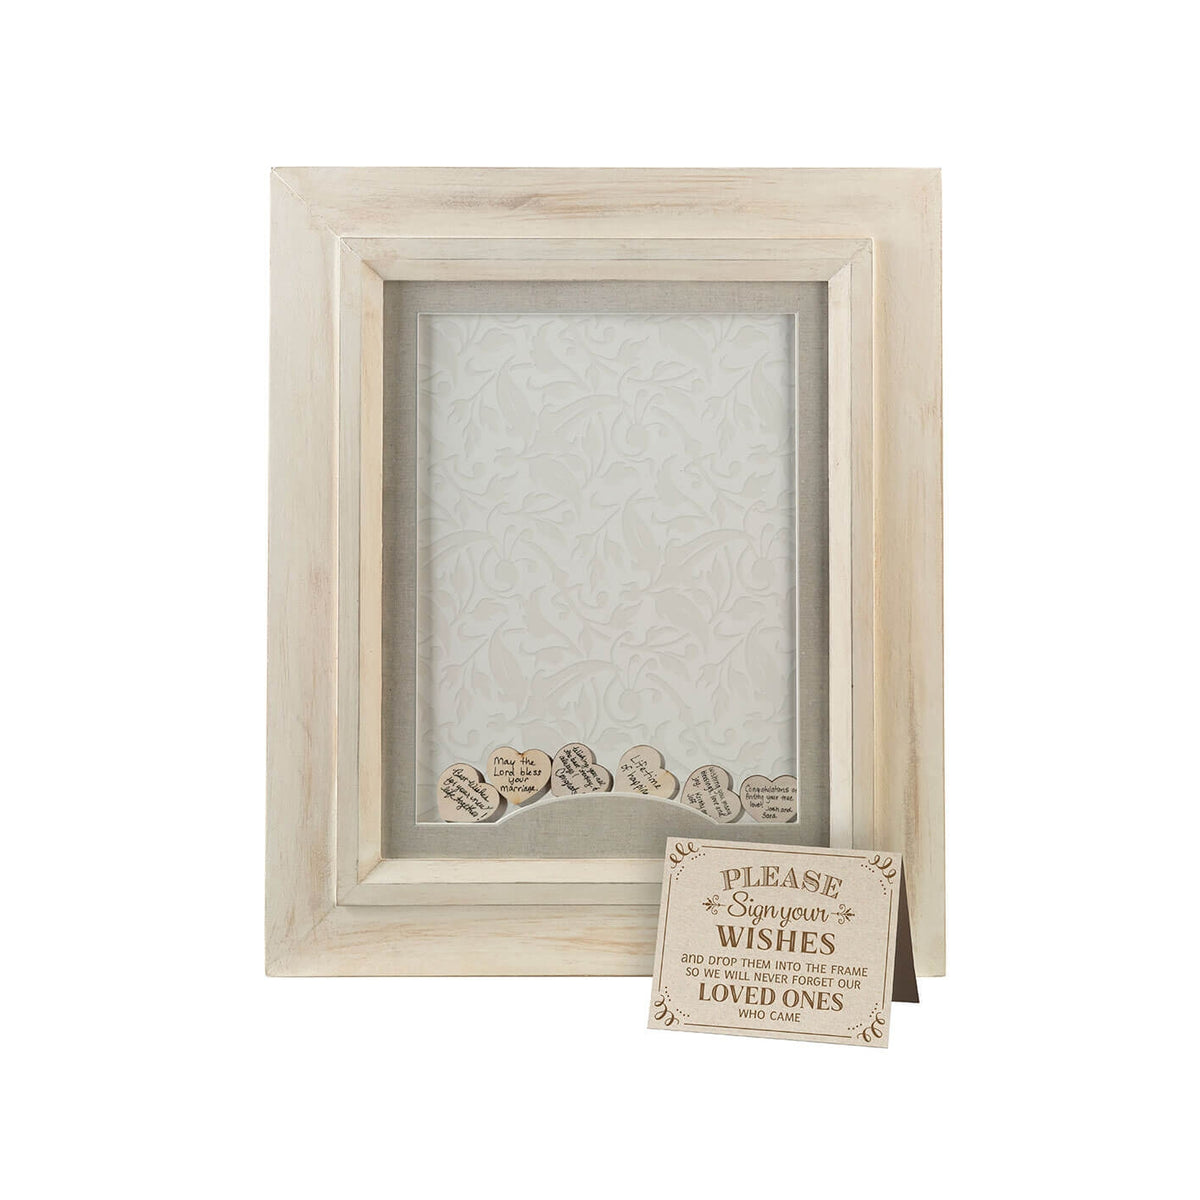 DROP TOP GUEST SIGNING FRAME | Bridal Gift - Alternative Guest Book - Wedding Accessories - Minter and Richter Designs